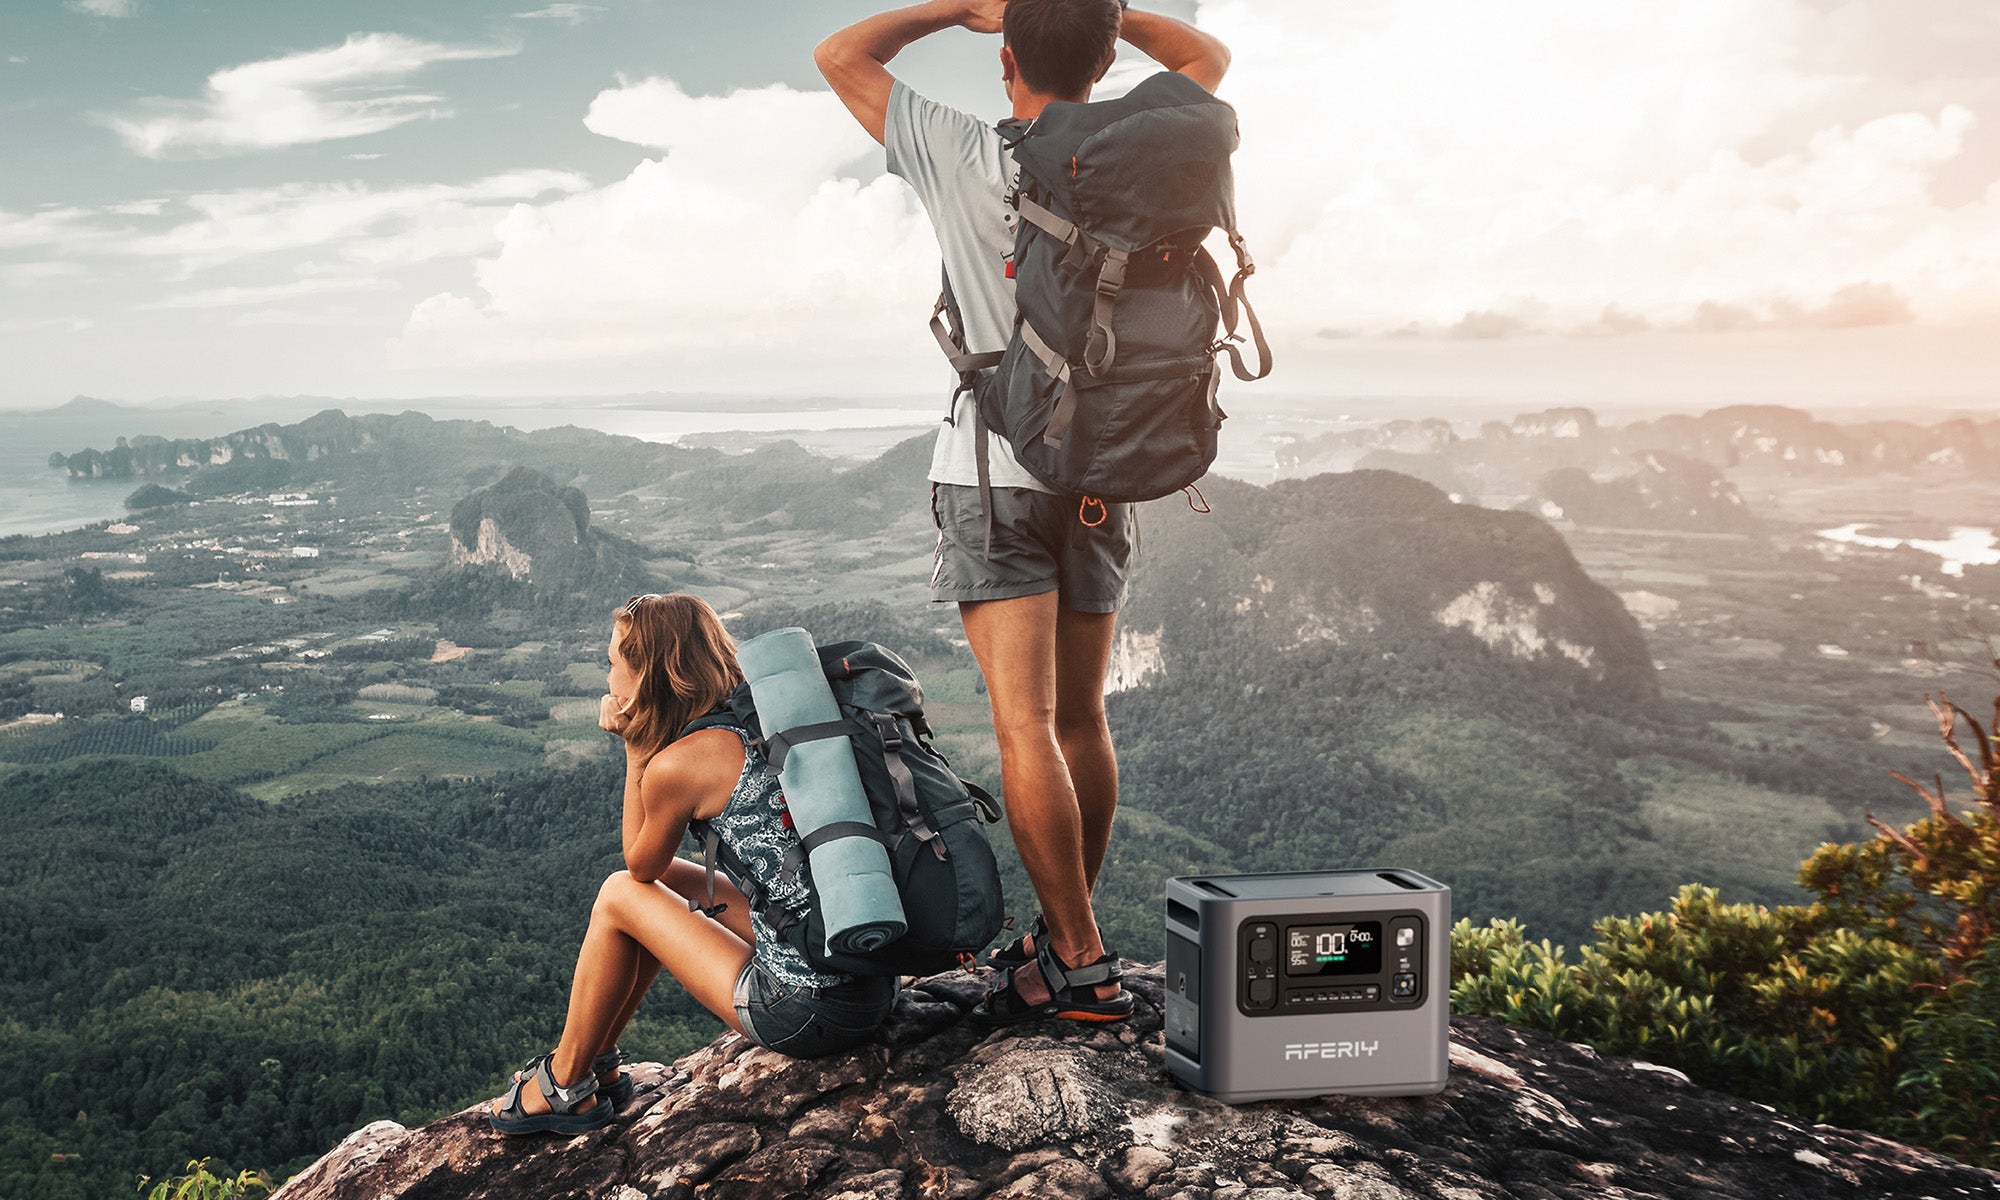 Portable power station for camping - Aferiy P210